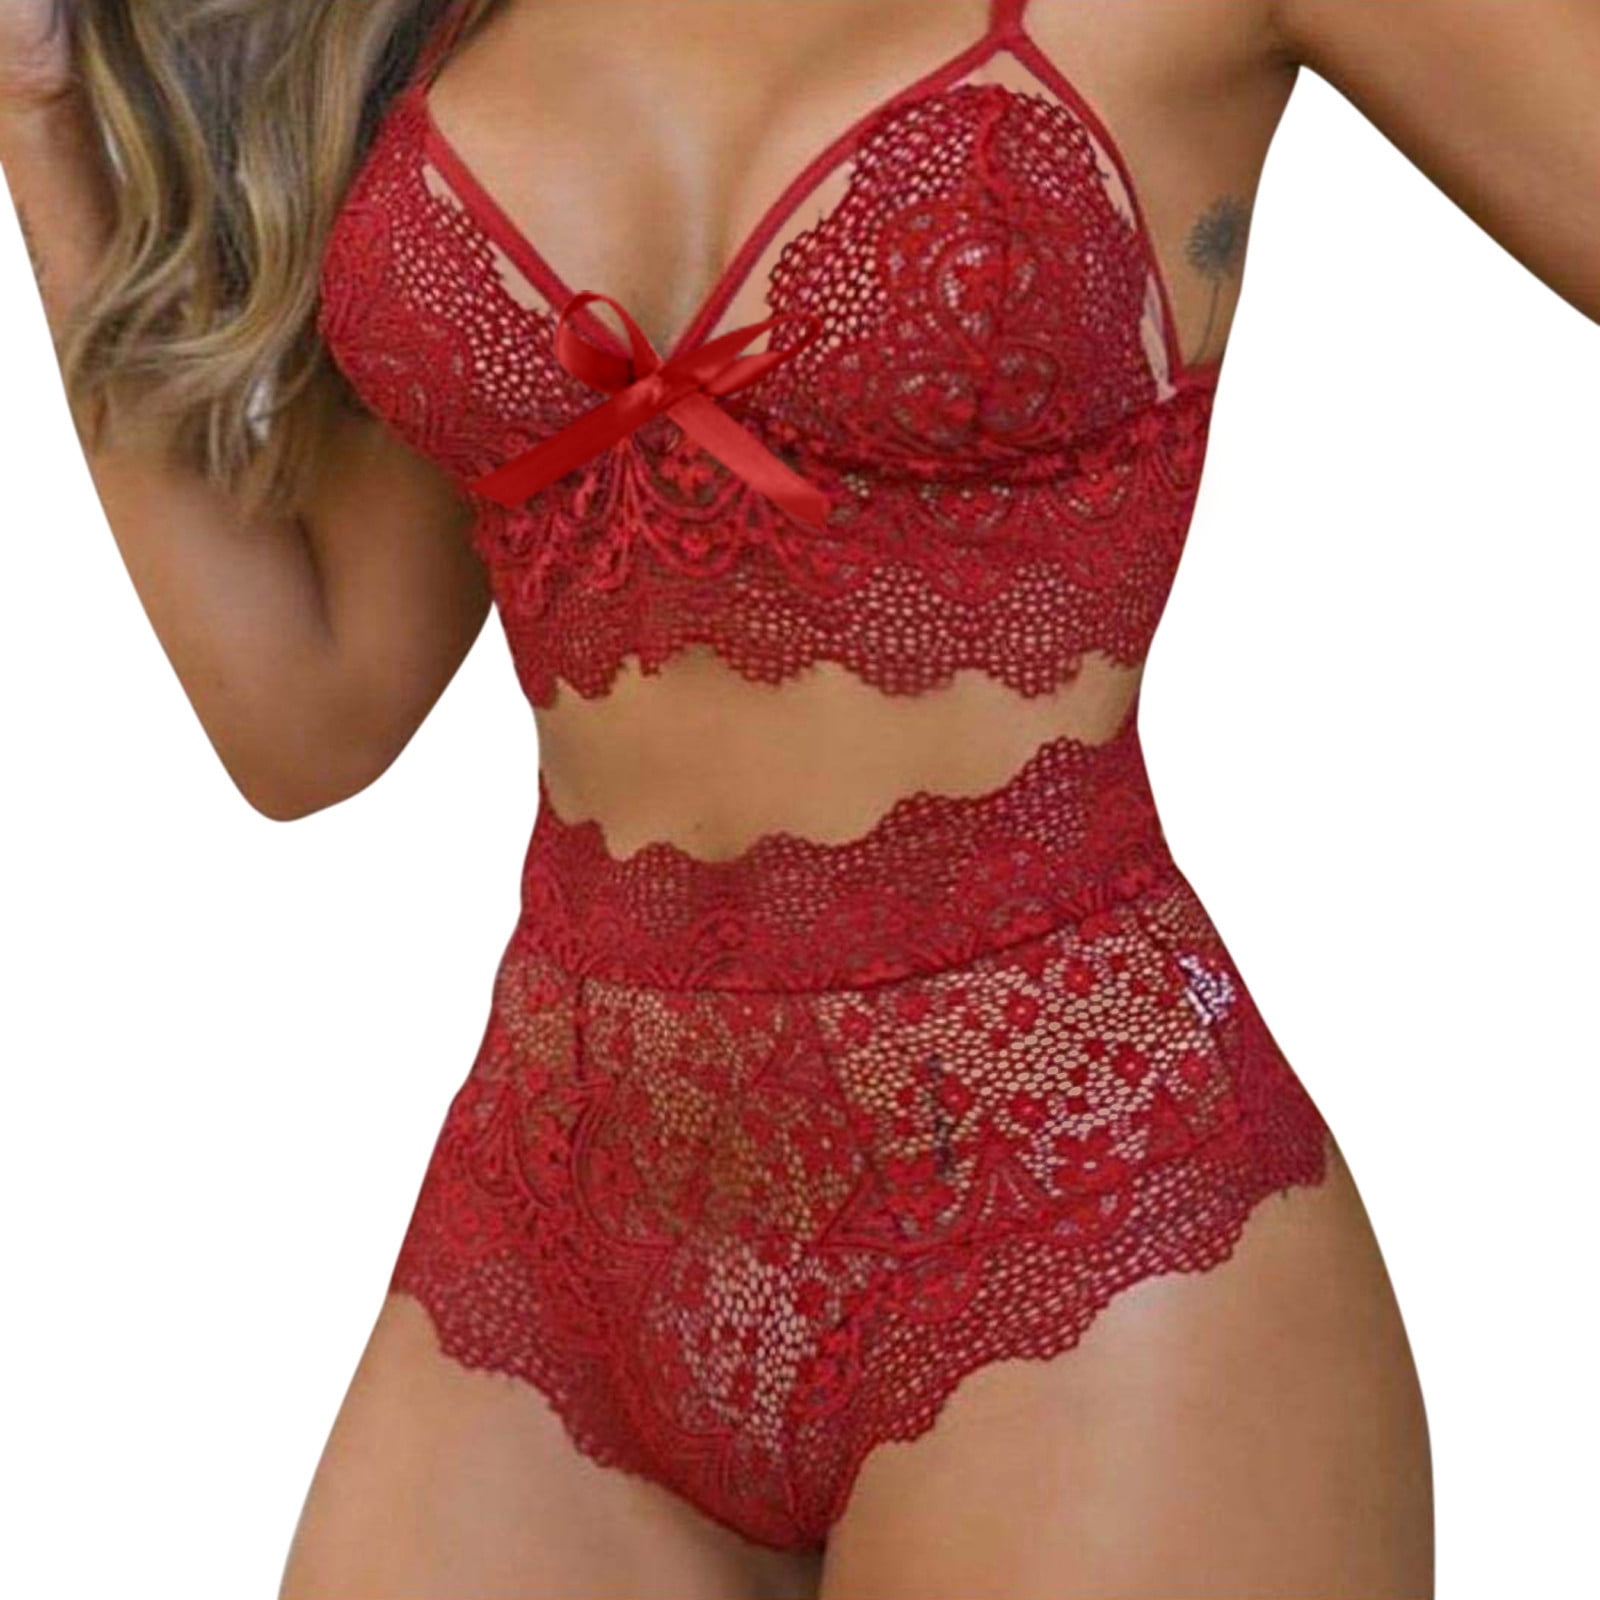 Plus Size Lingerie Set for Women， Sexy Cross Strappy Lace Up Bra